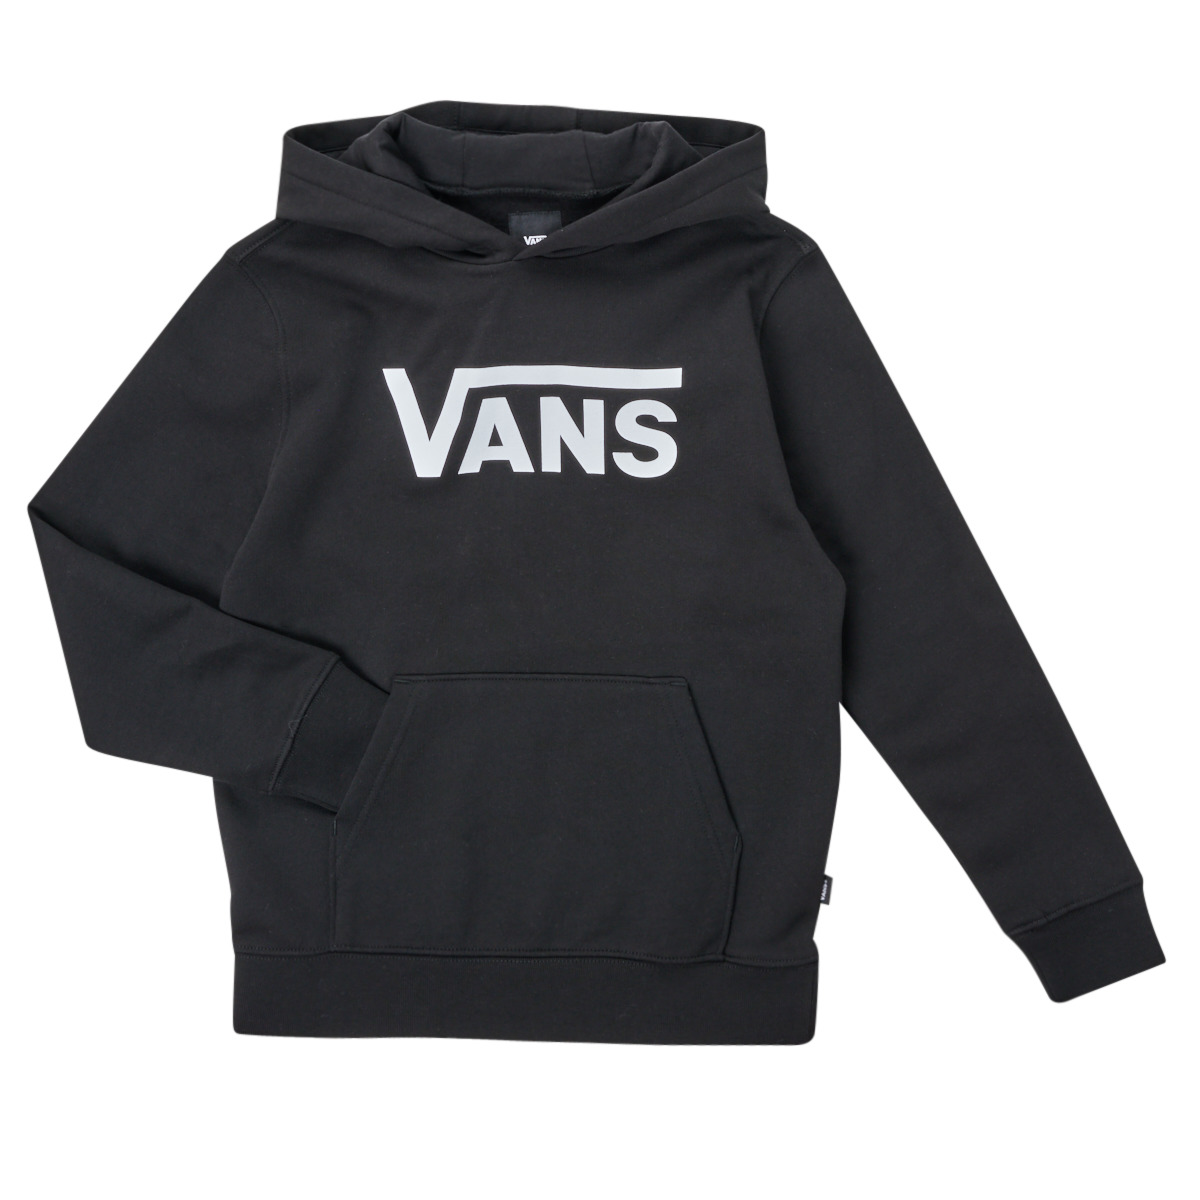 Vans BY VANS CLASSIC PO NET Clothing - ! - delivery | KIDS Child Free sweaters Spartoo Black